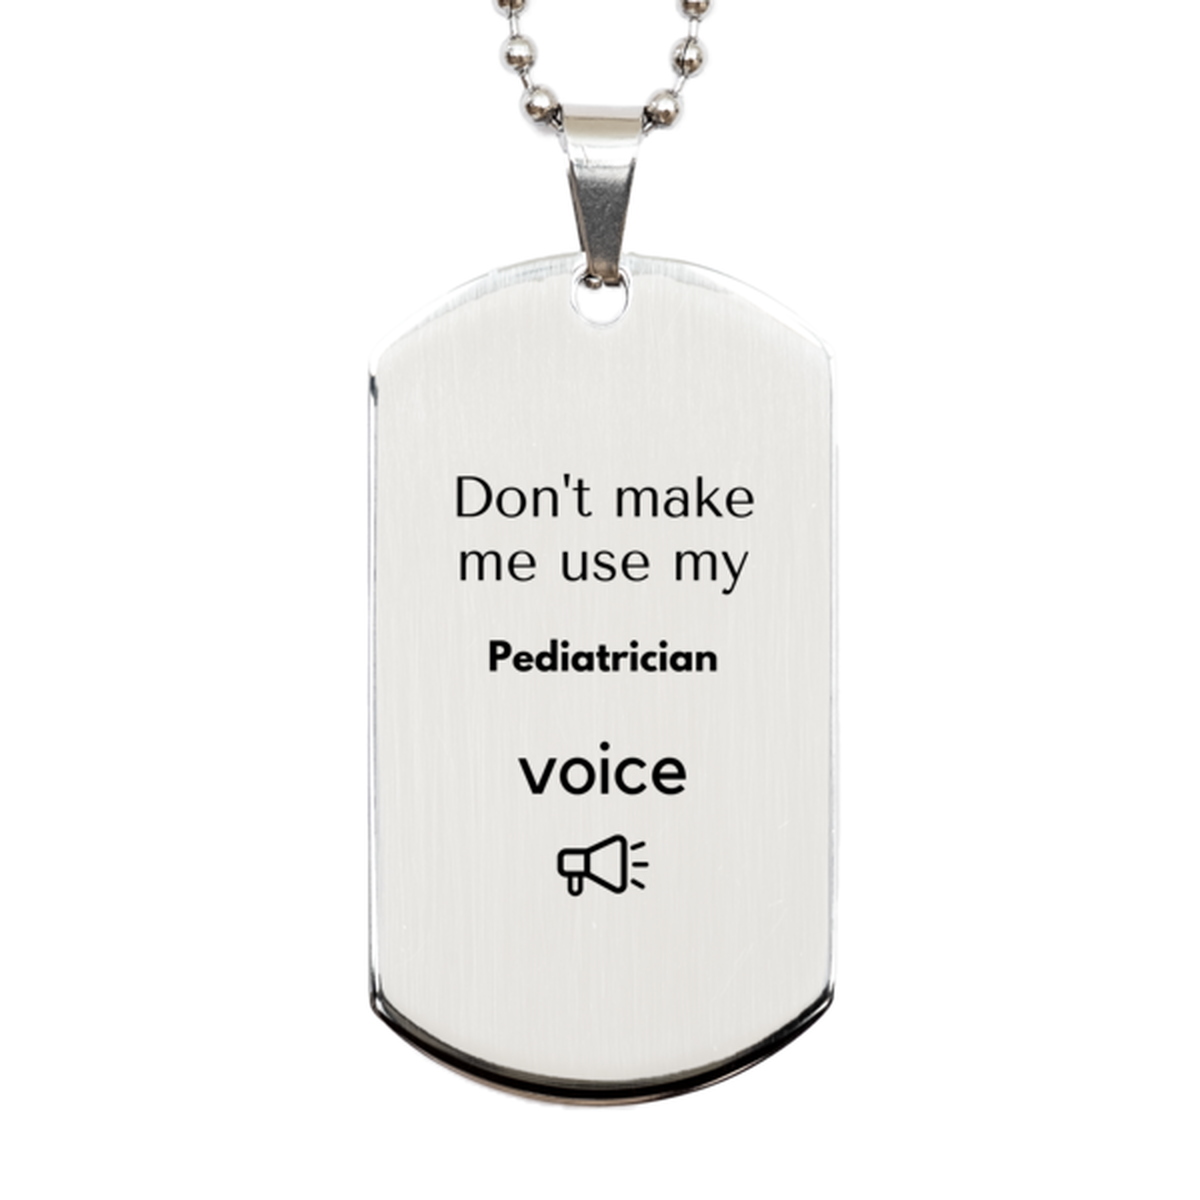 Don't make me use my Pediatrician voice, Sarcasm Pediatrician Gifts, Christmas Pediatrician Silver Dog Tag Birthday Unique Gifts For Pediatrician Coworkers, Men, Women, Colleague, Friends